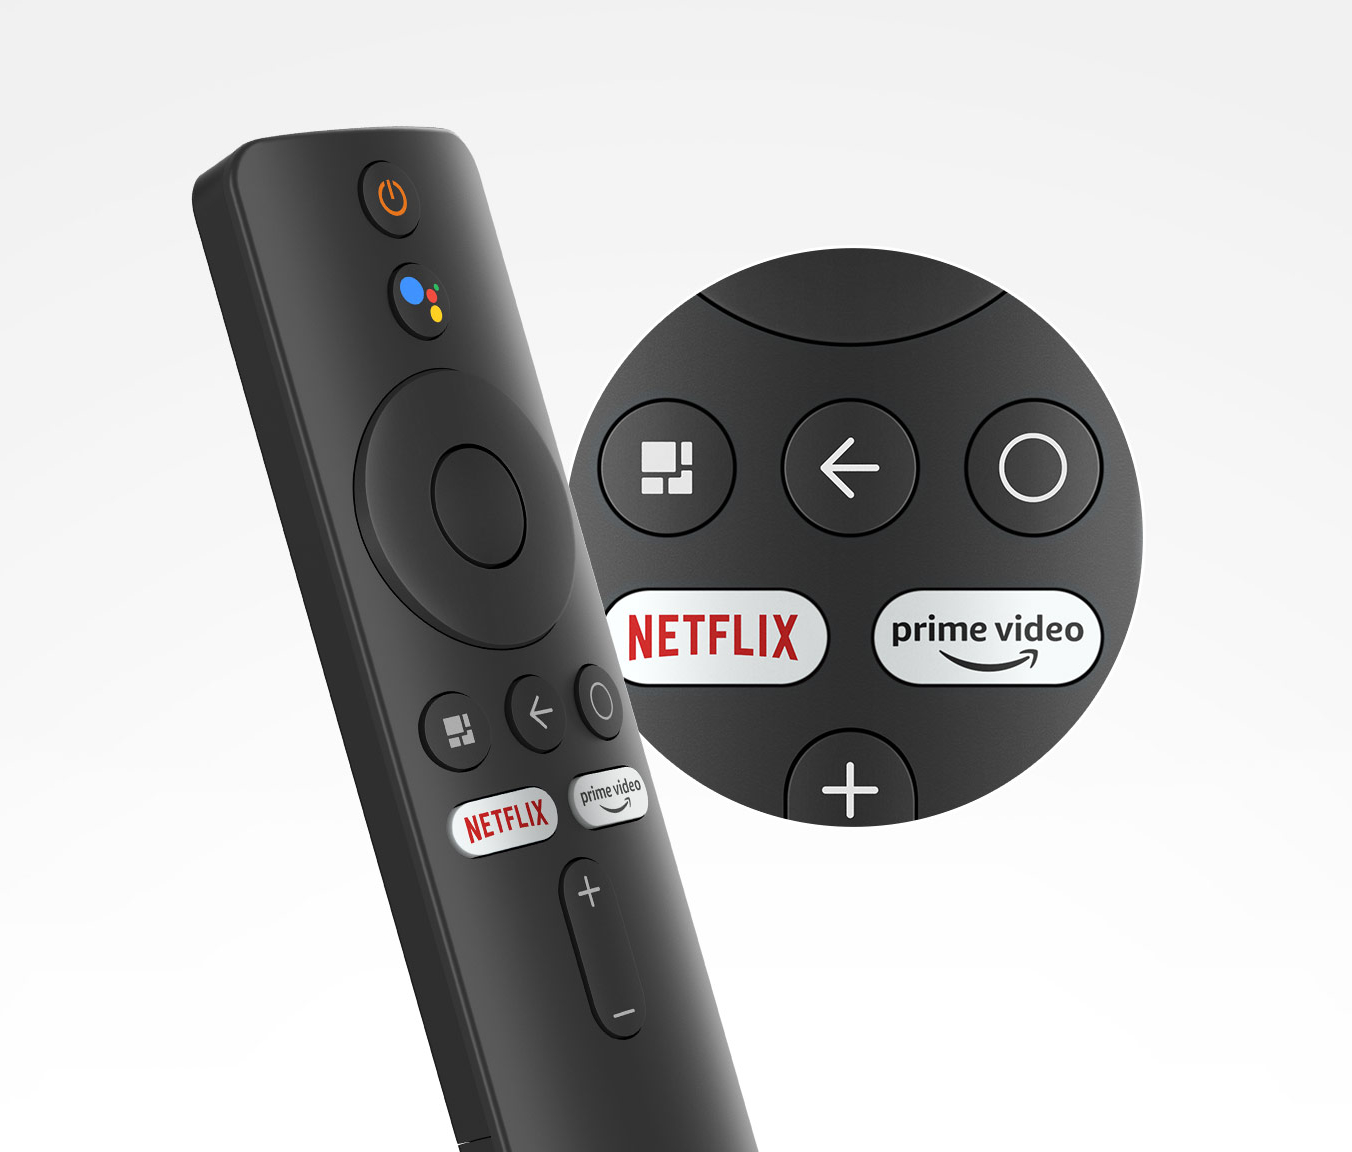 The Xiaomi TV Stick 4K is finally orderable for US$57.99 with